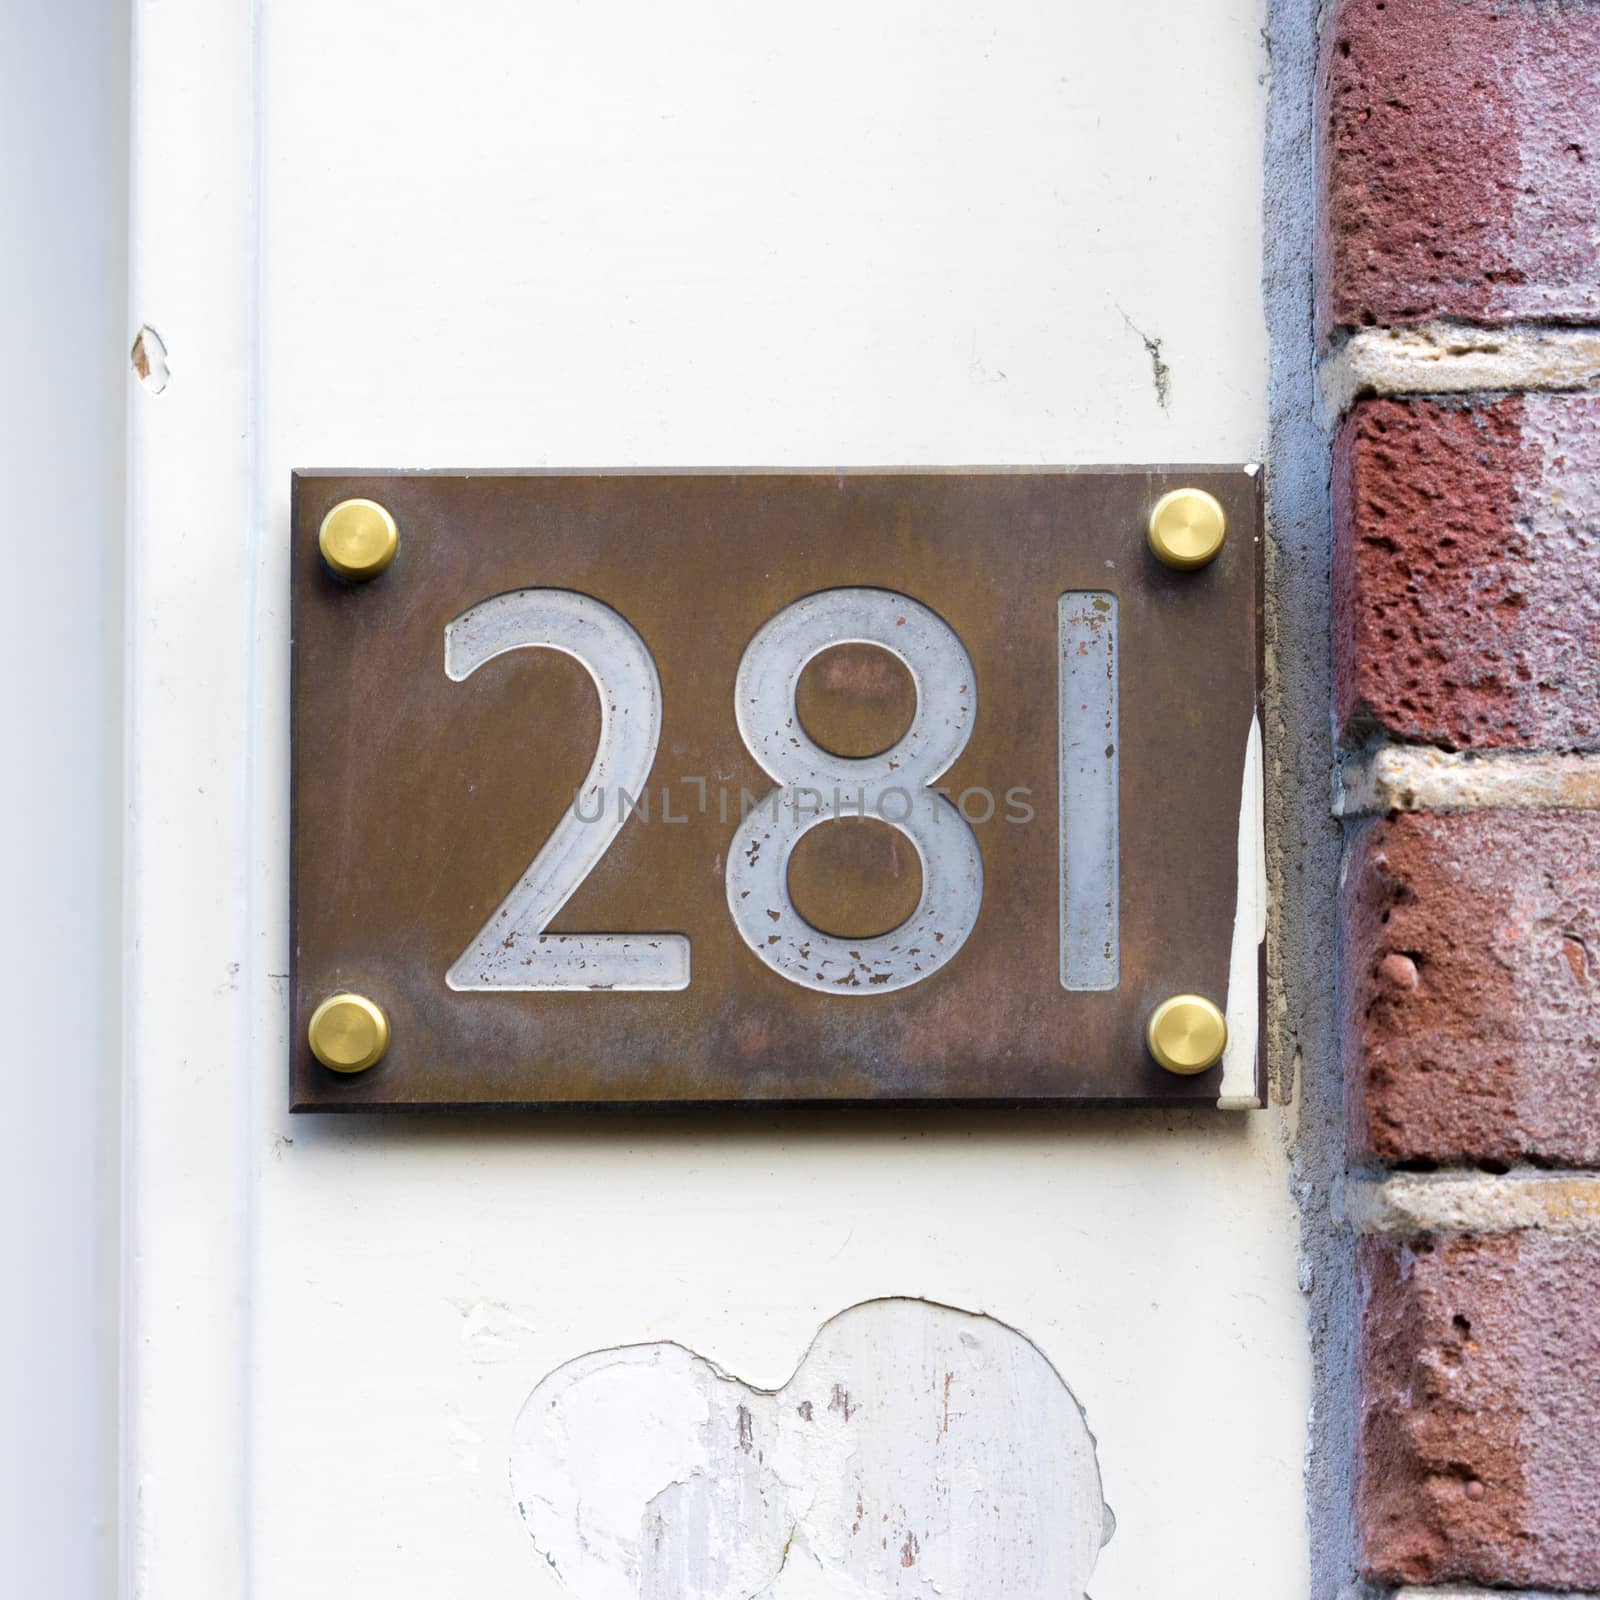 House number two hundred and eighty one (281) engraved in a bronze plate